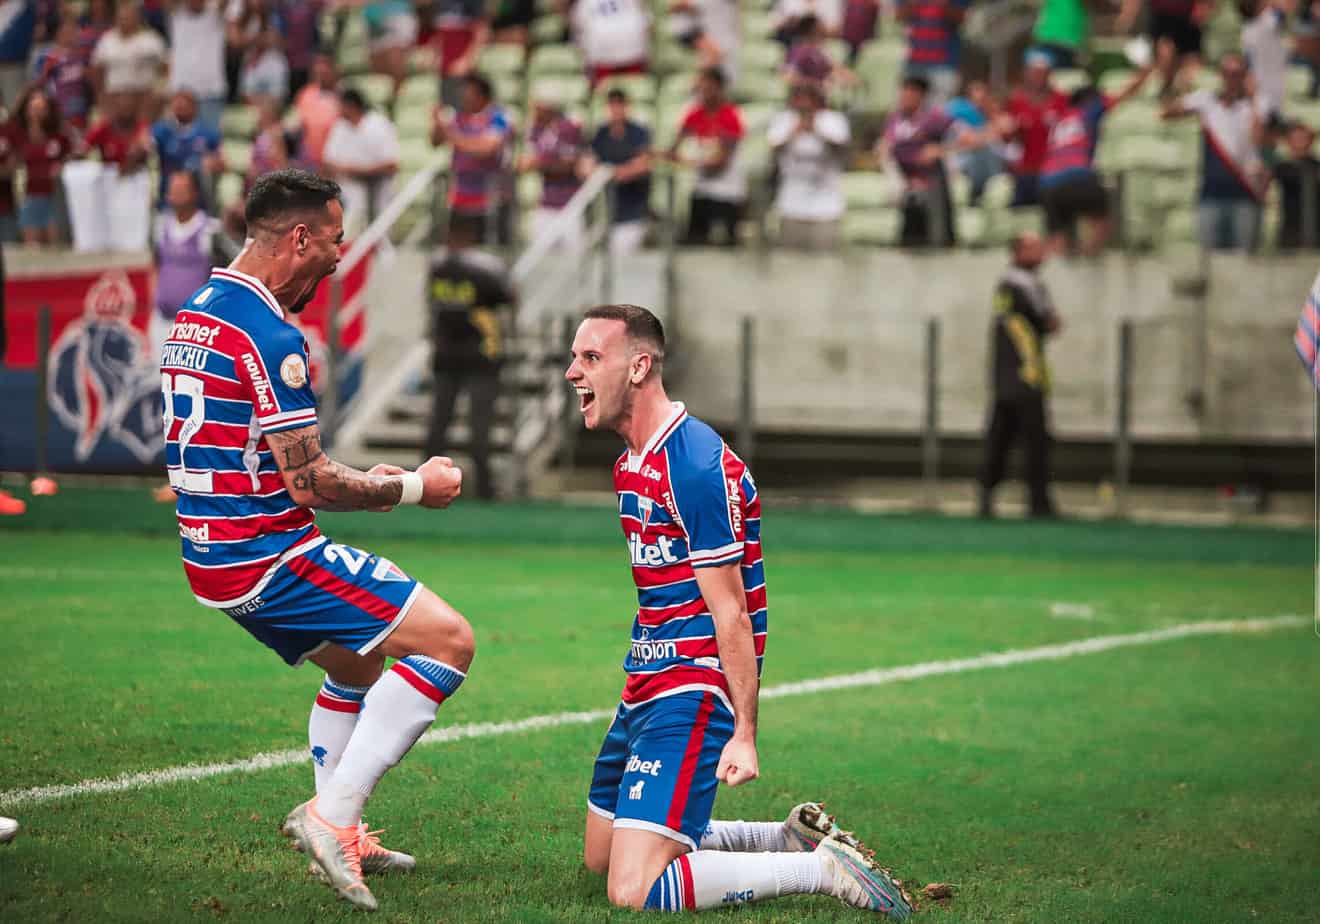 Fortaleza vs. Athletico-PR Preview and Betting Odds